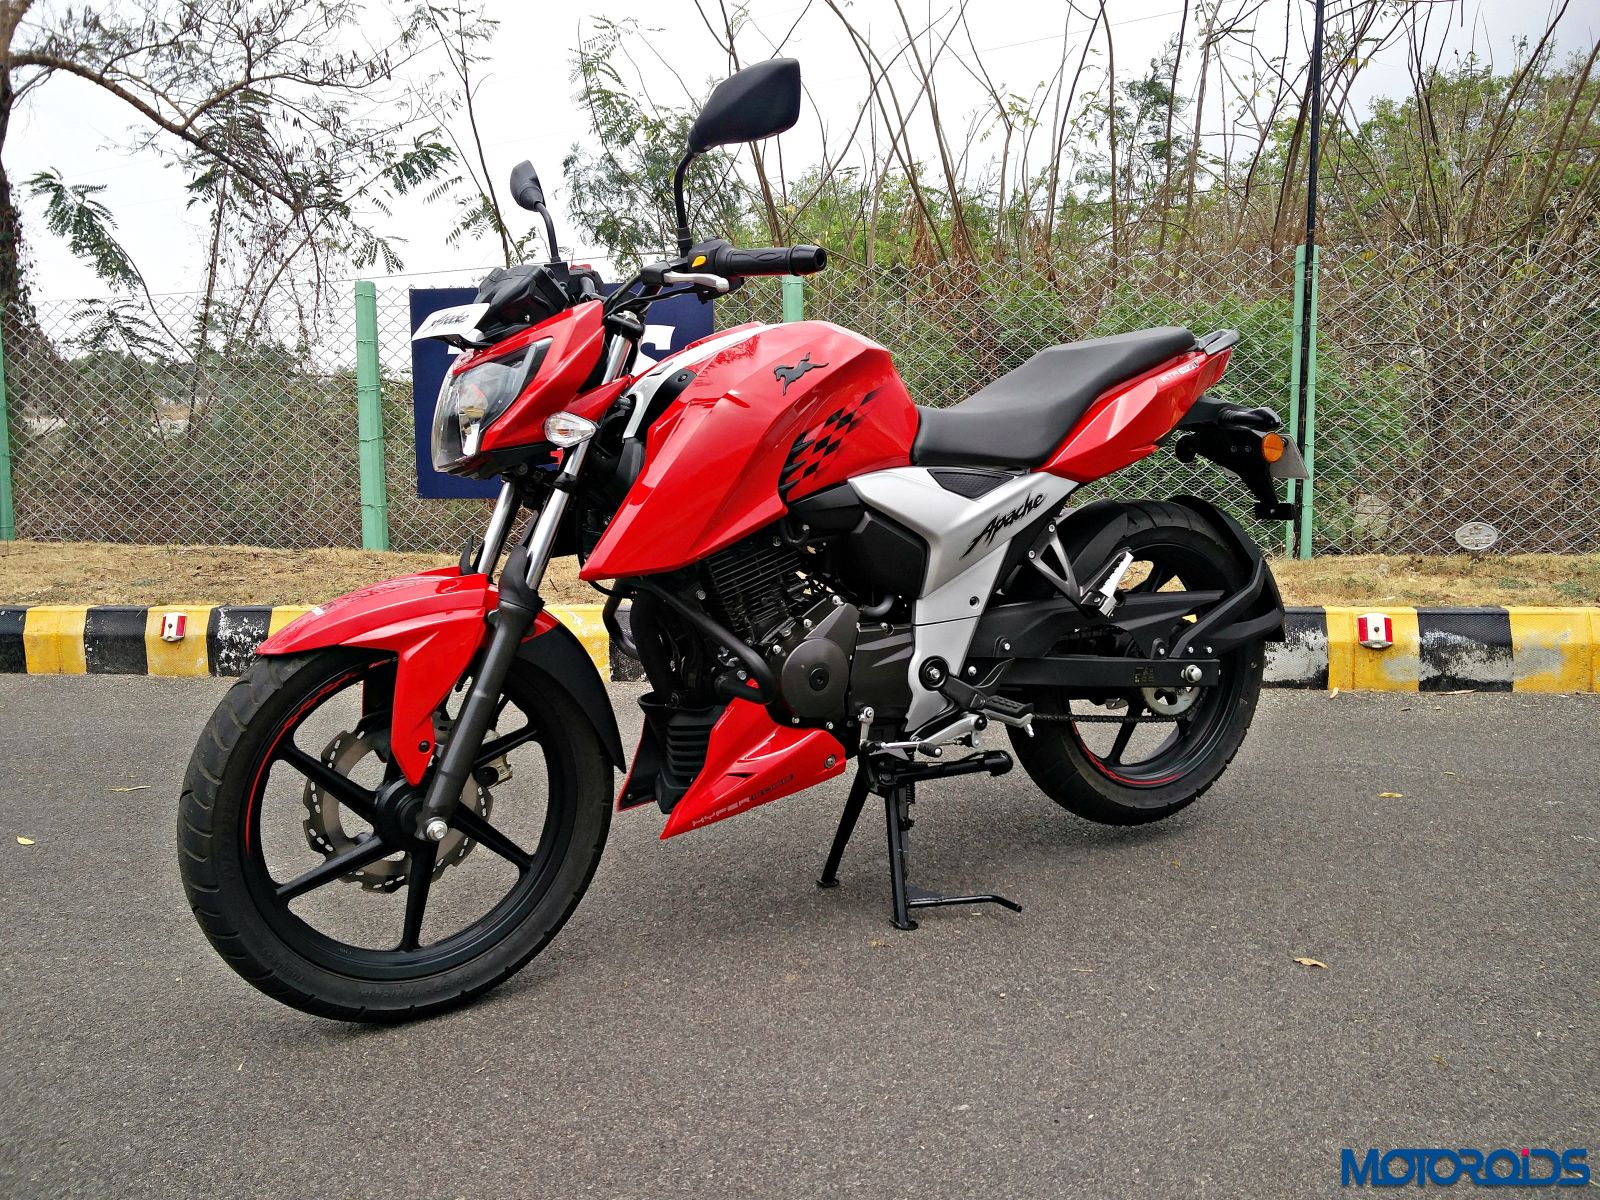 After Conquering India Where Is The Tvs Apache Rtr 160 4v Headed Motoroids